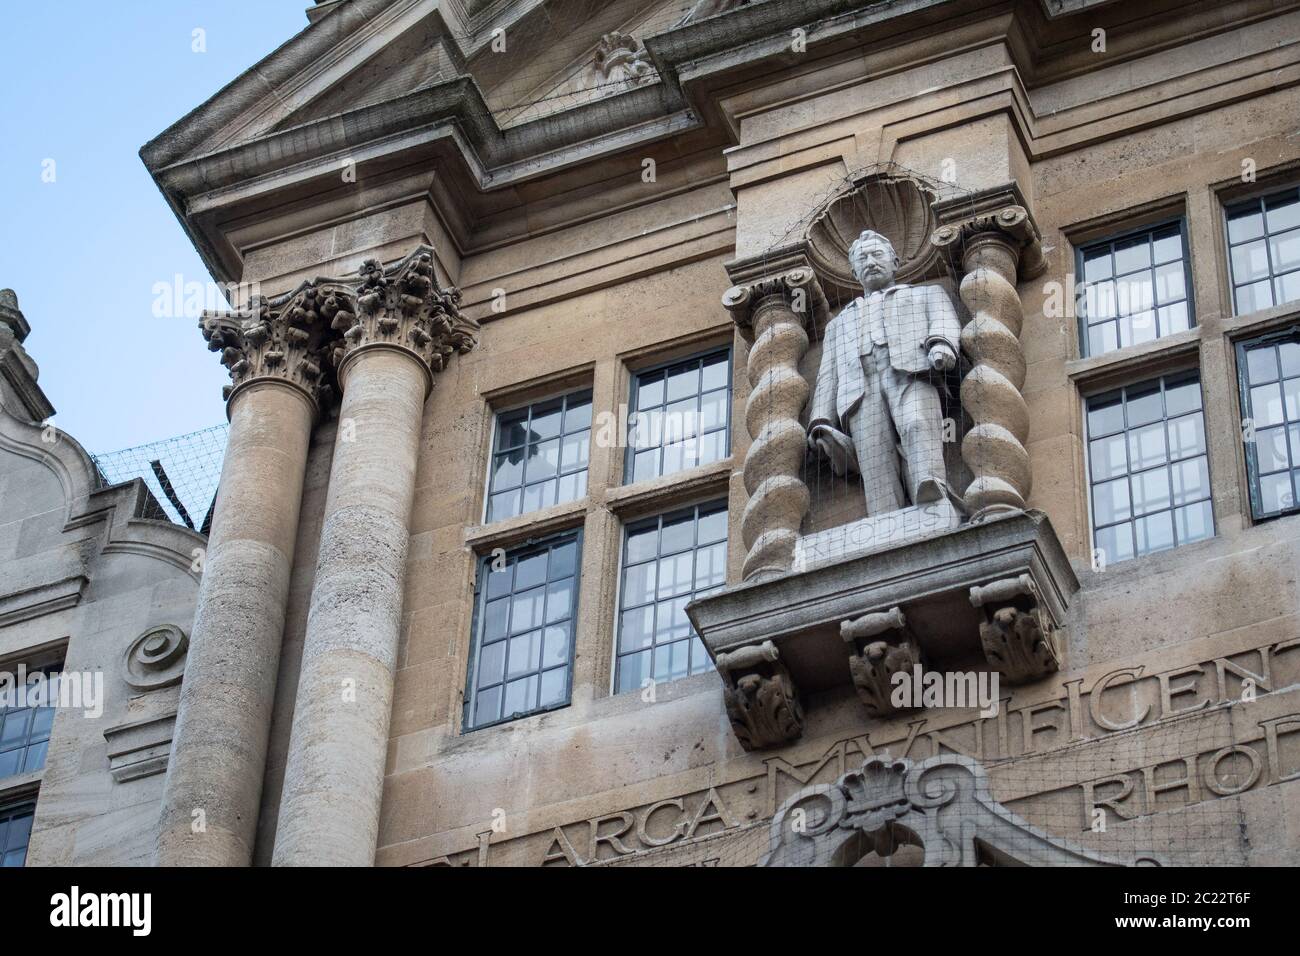 Oxford, UK. 16th June, 2020. Black Lives Matter protest through Oxford to build pressure on Oxford University to remove the statue of the slave trader Cecil Rhodes from Oriel College. Credit: Andrew Walmsley/Alamy Live News Stock Photo